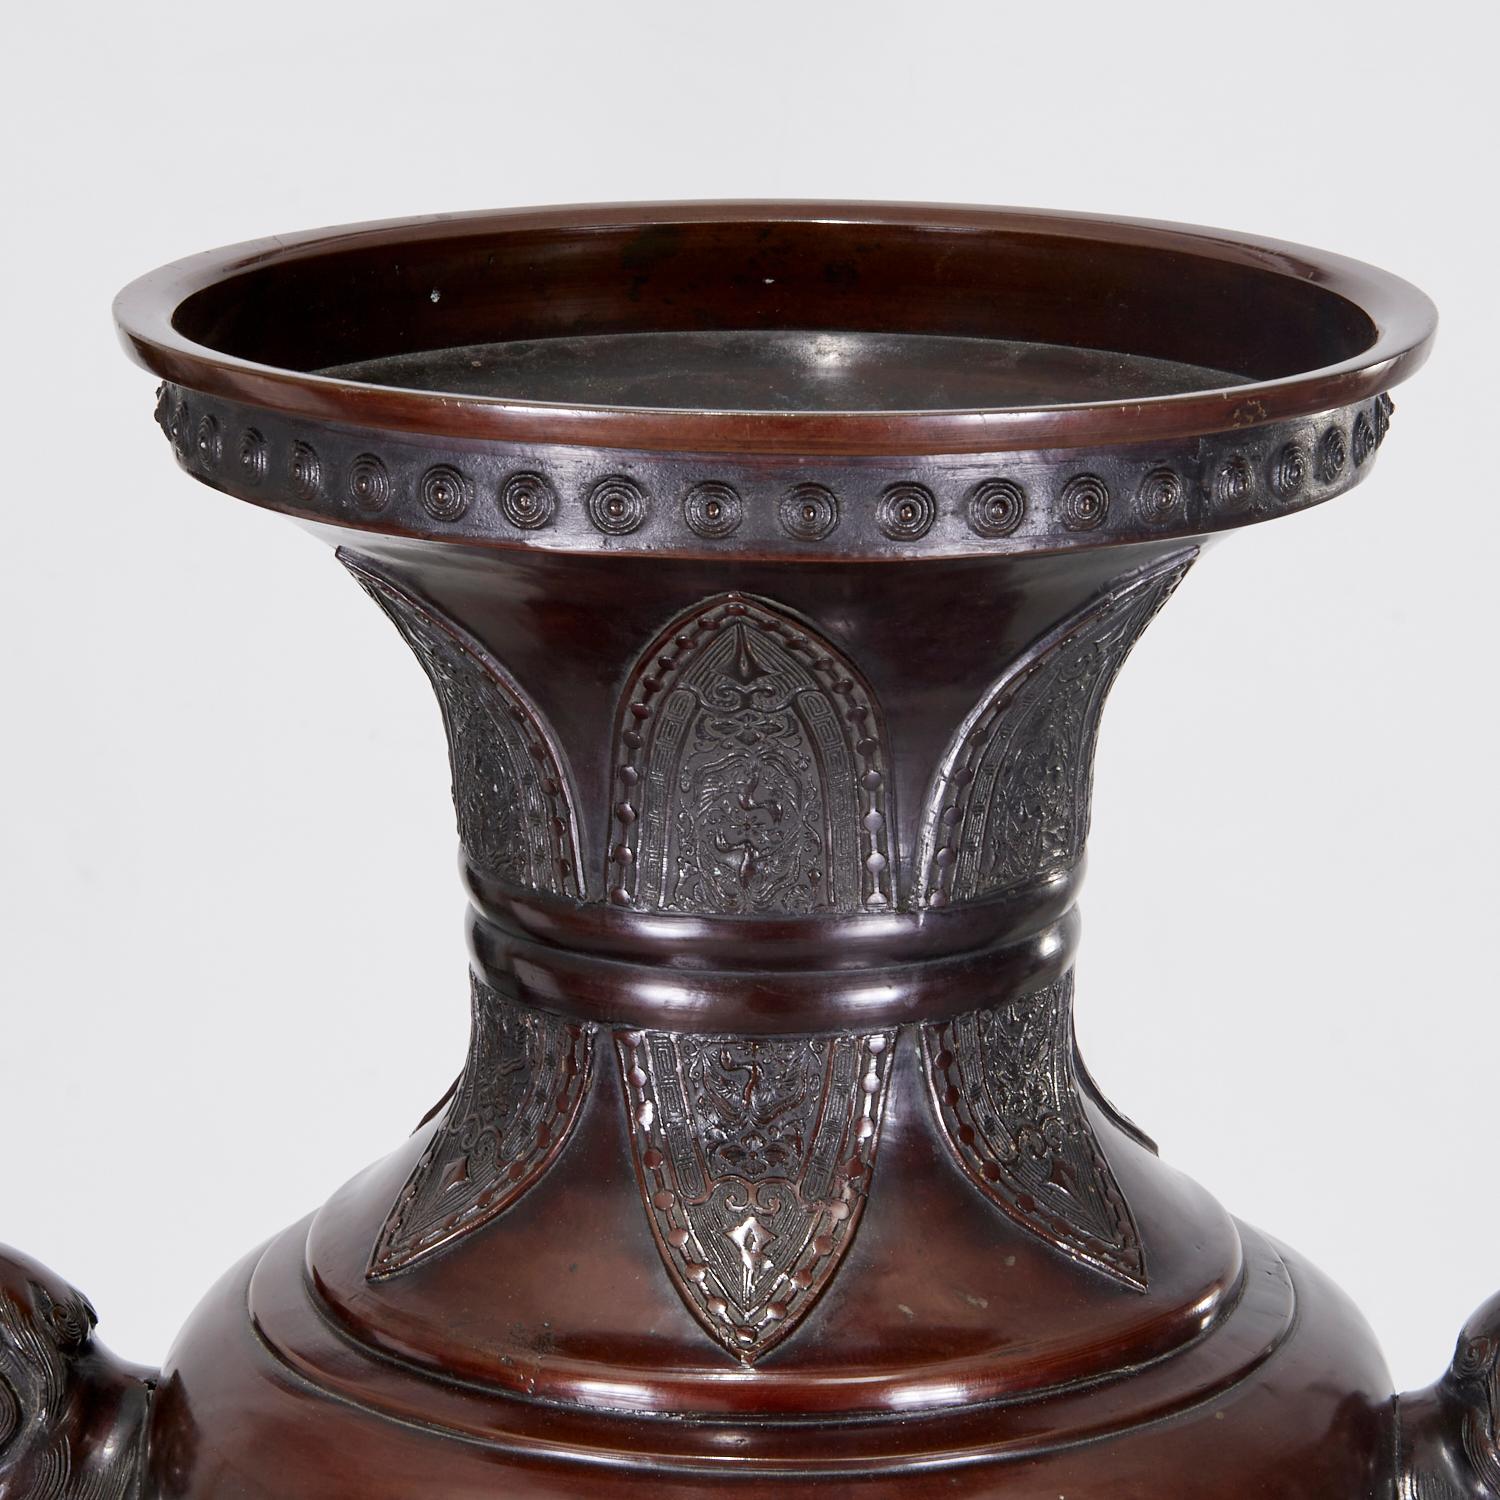 Late 19th/Early 20th c., large Japanese Meiji bronze floor urn. The principal decoration on both sides of the vase is rendered in beautiful and strong relief. One side depicts birds, possibly skylarks, in flight and on flowering cherry blossom